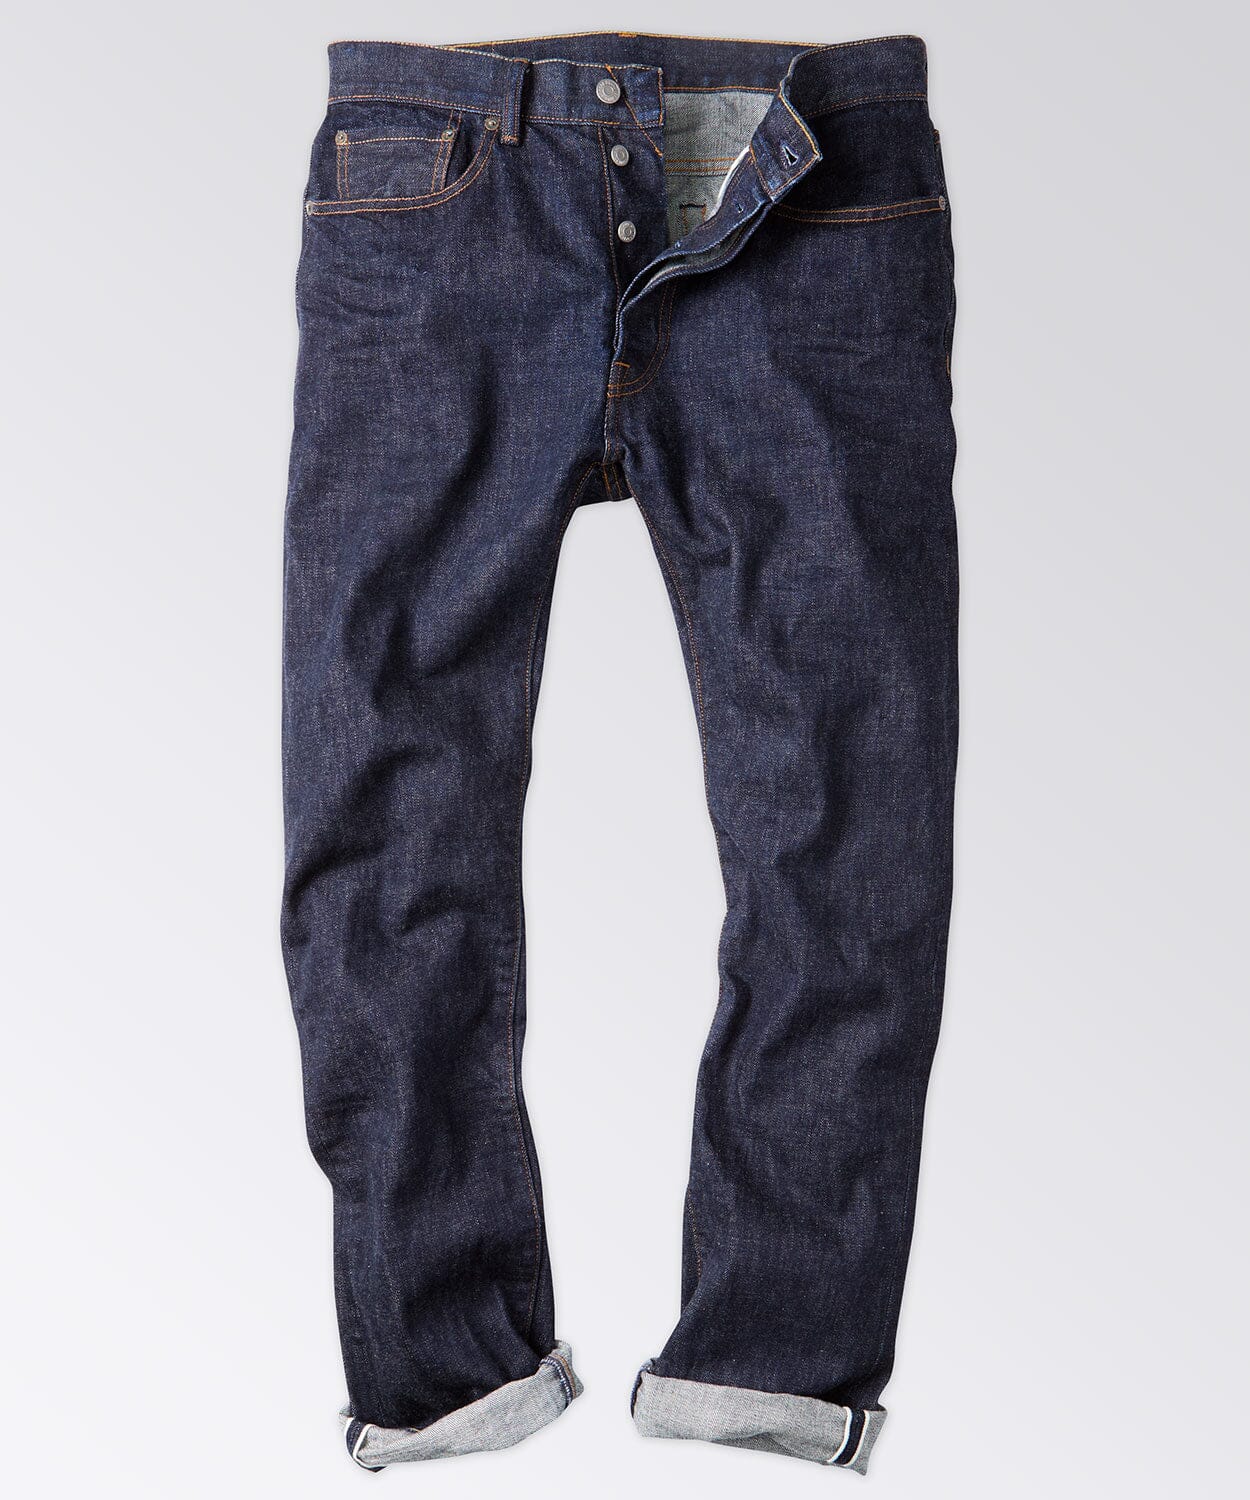 Selvage Denim at AG Jeans Official Store